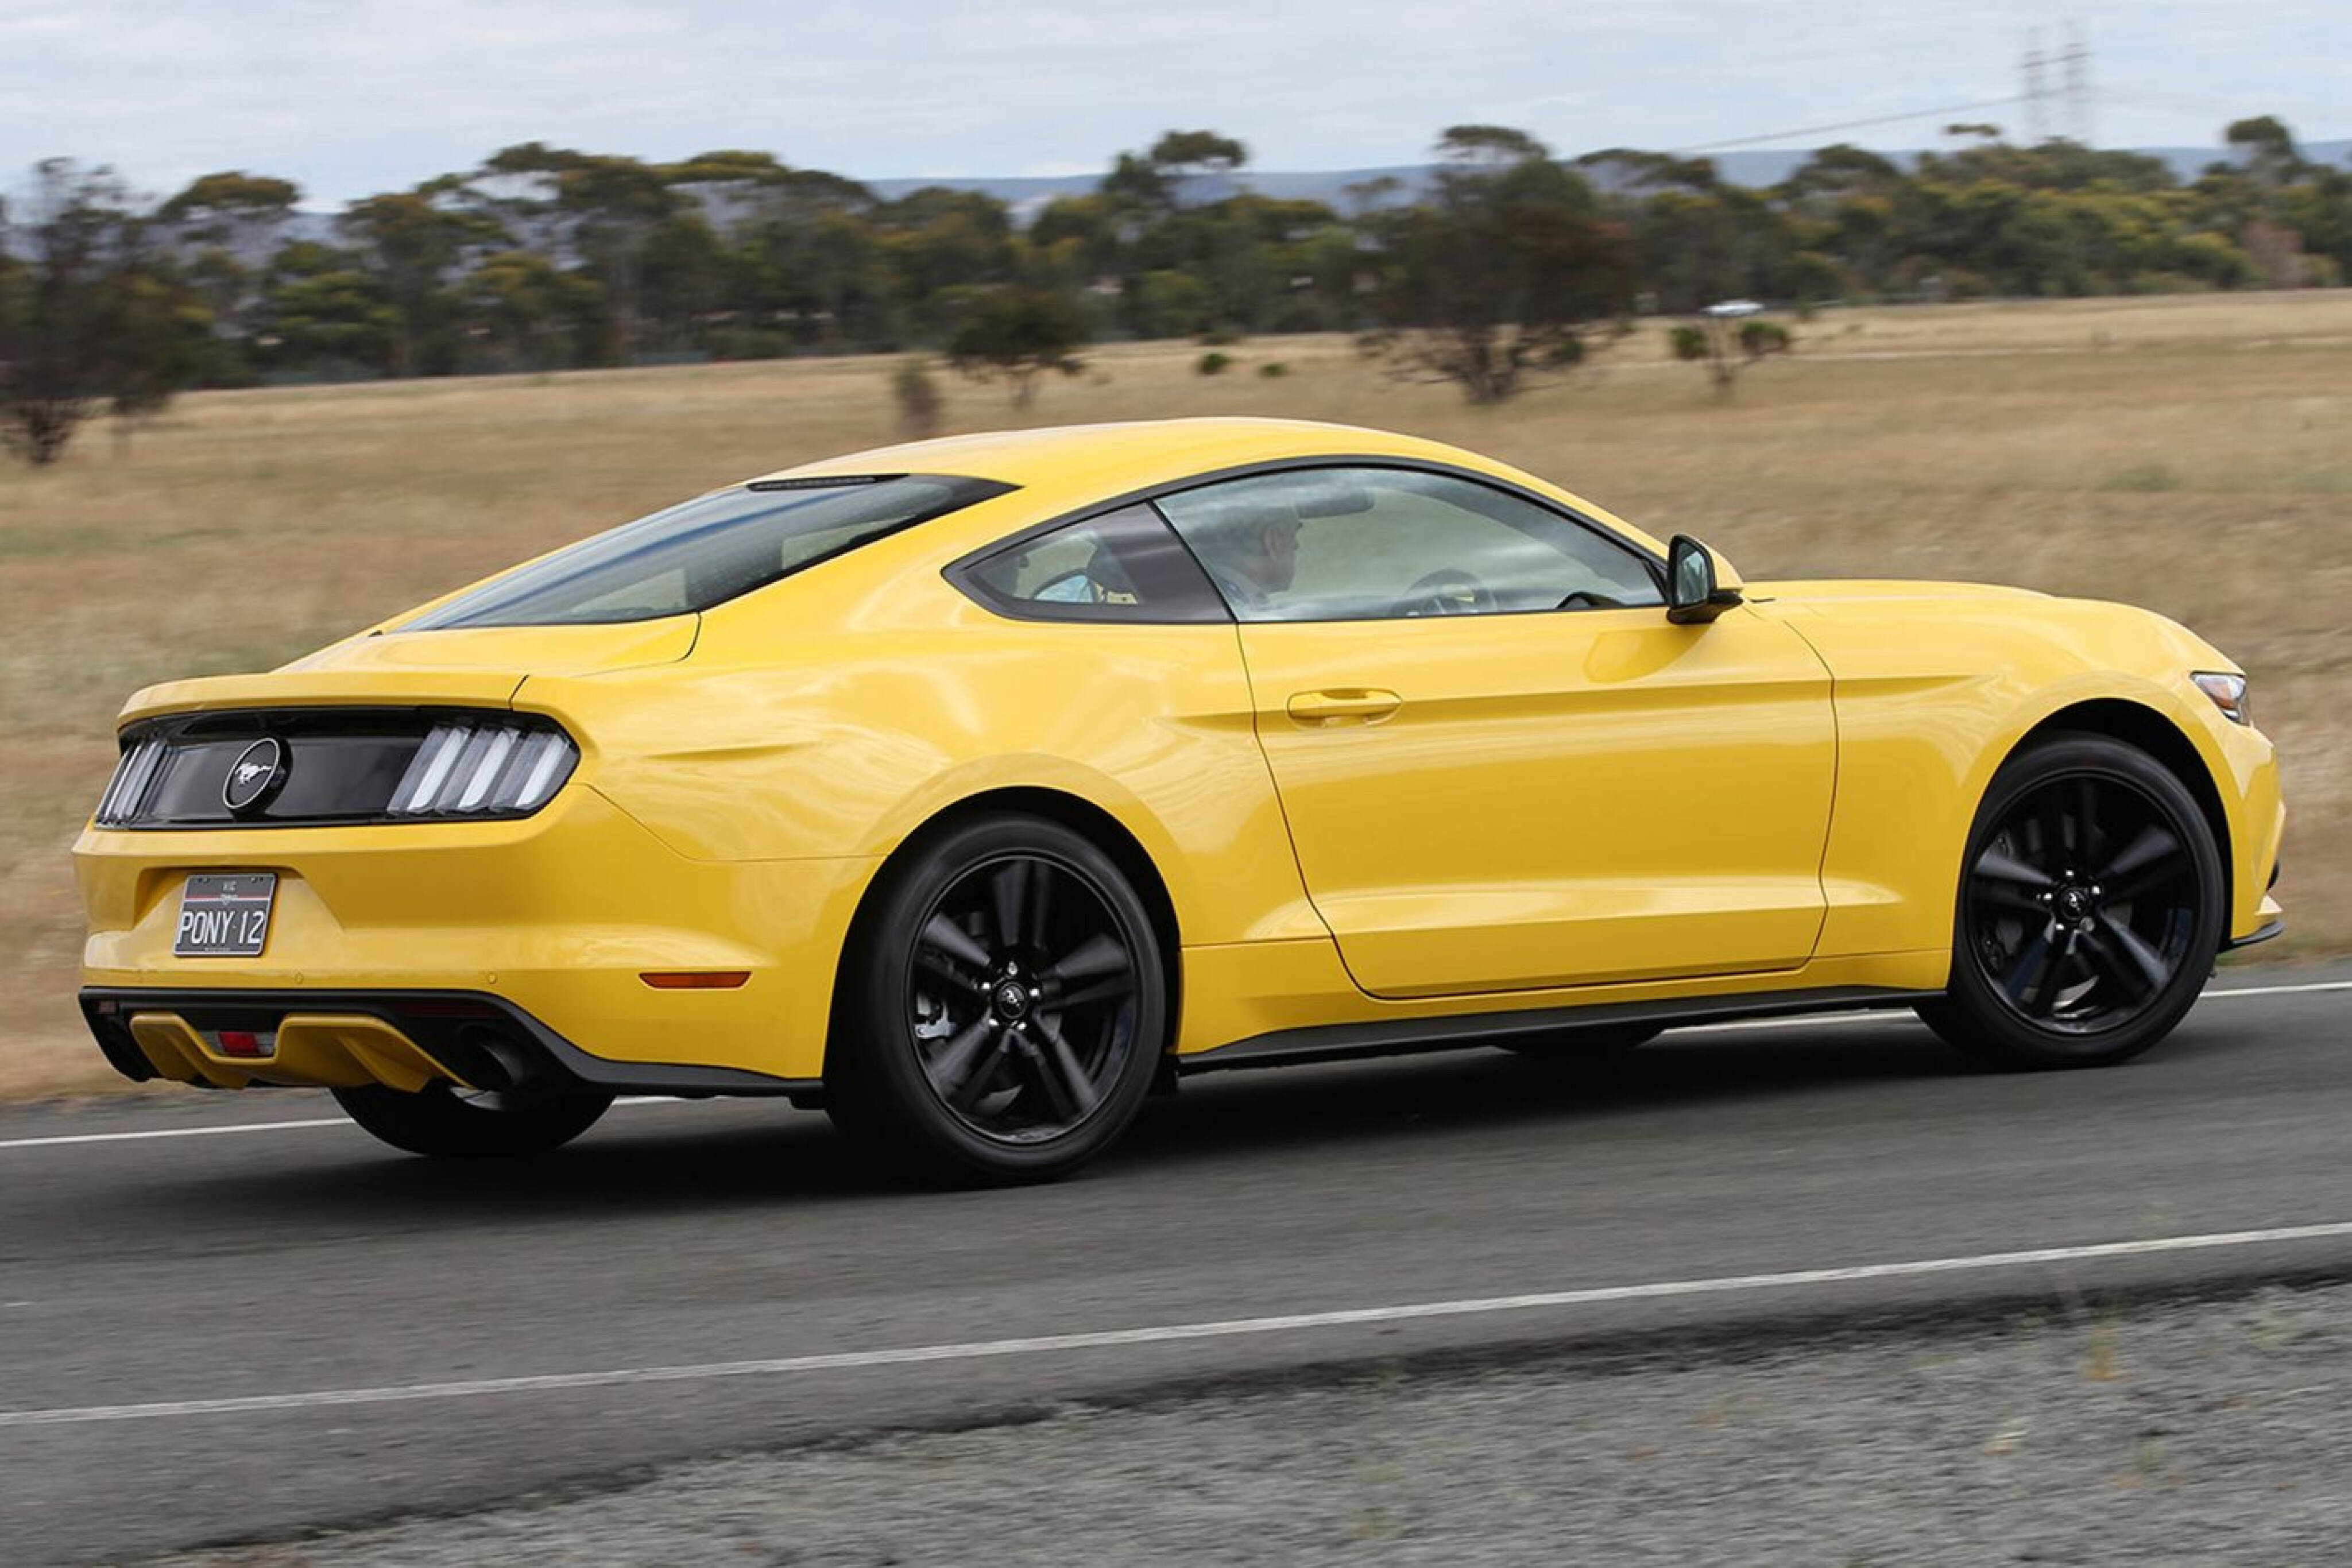 c1e20aaa/ford mustang yellow driving jpg